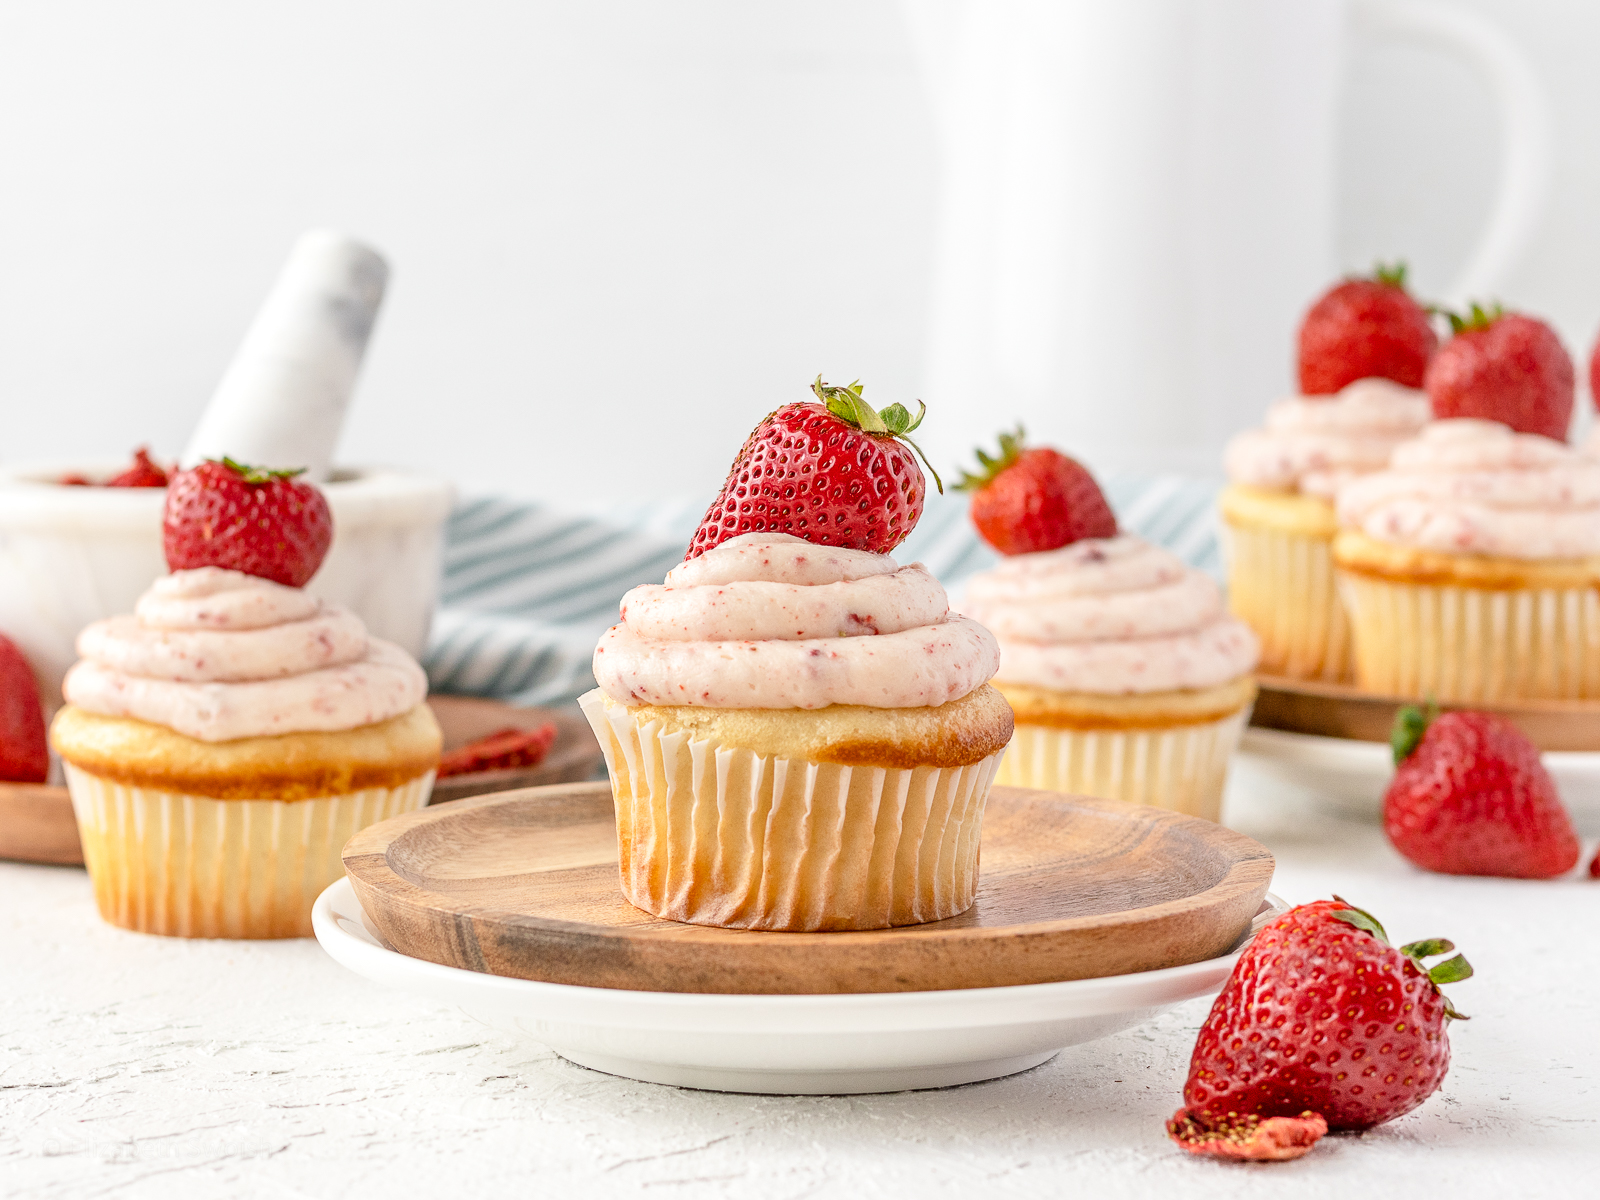 Strawberry Jam Filled Cupcakes topped with fresh strawberries scattered and ready to eat